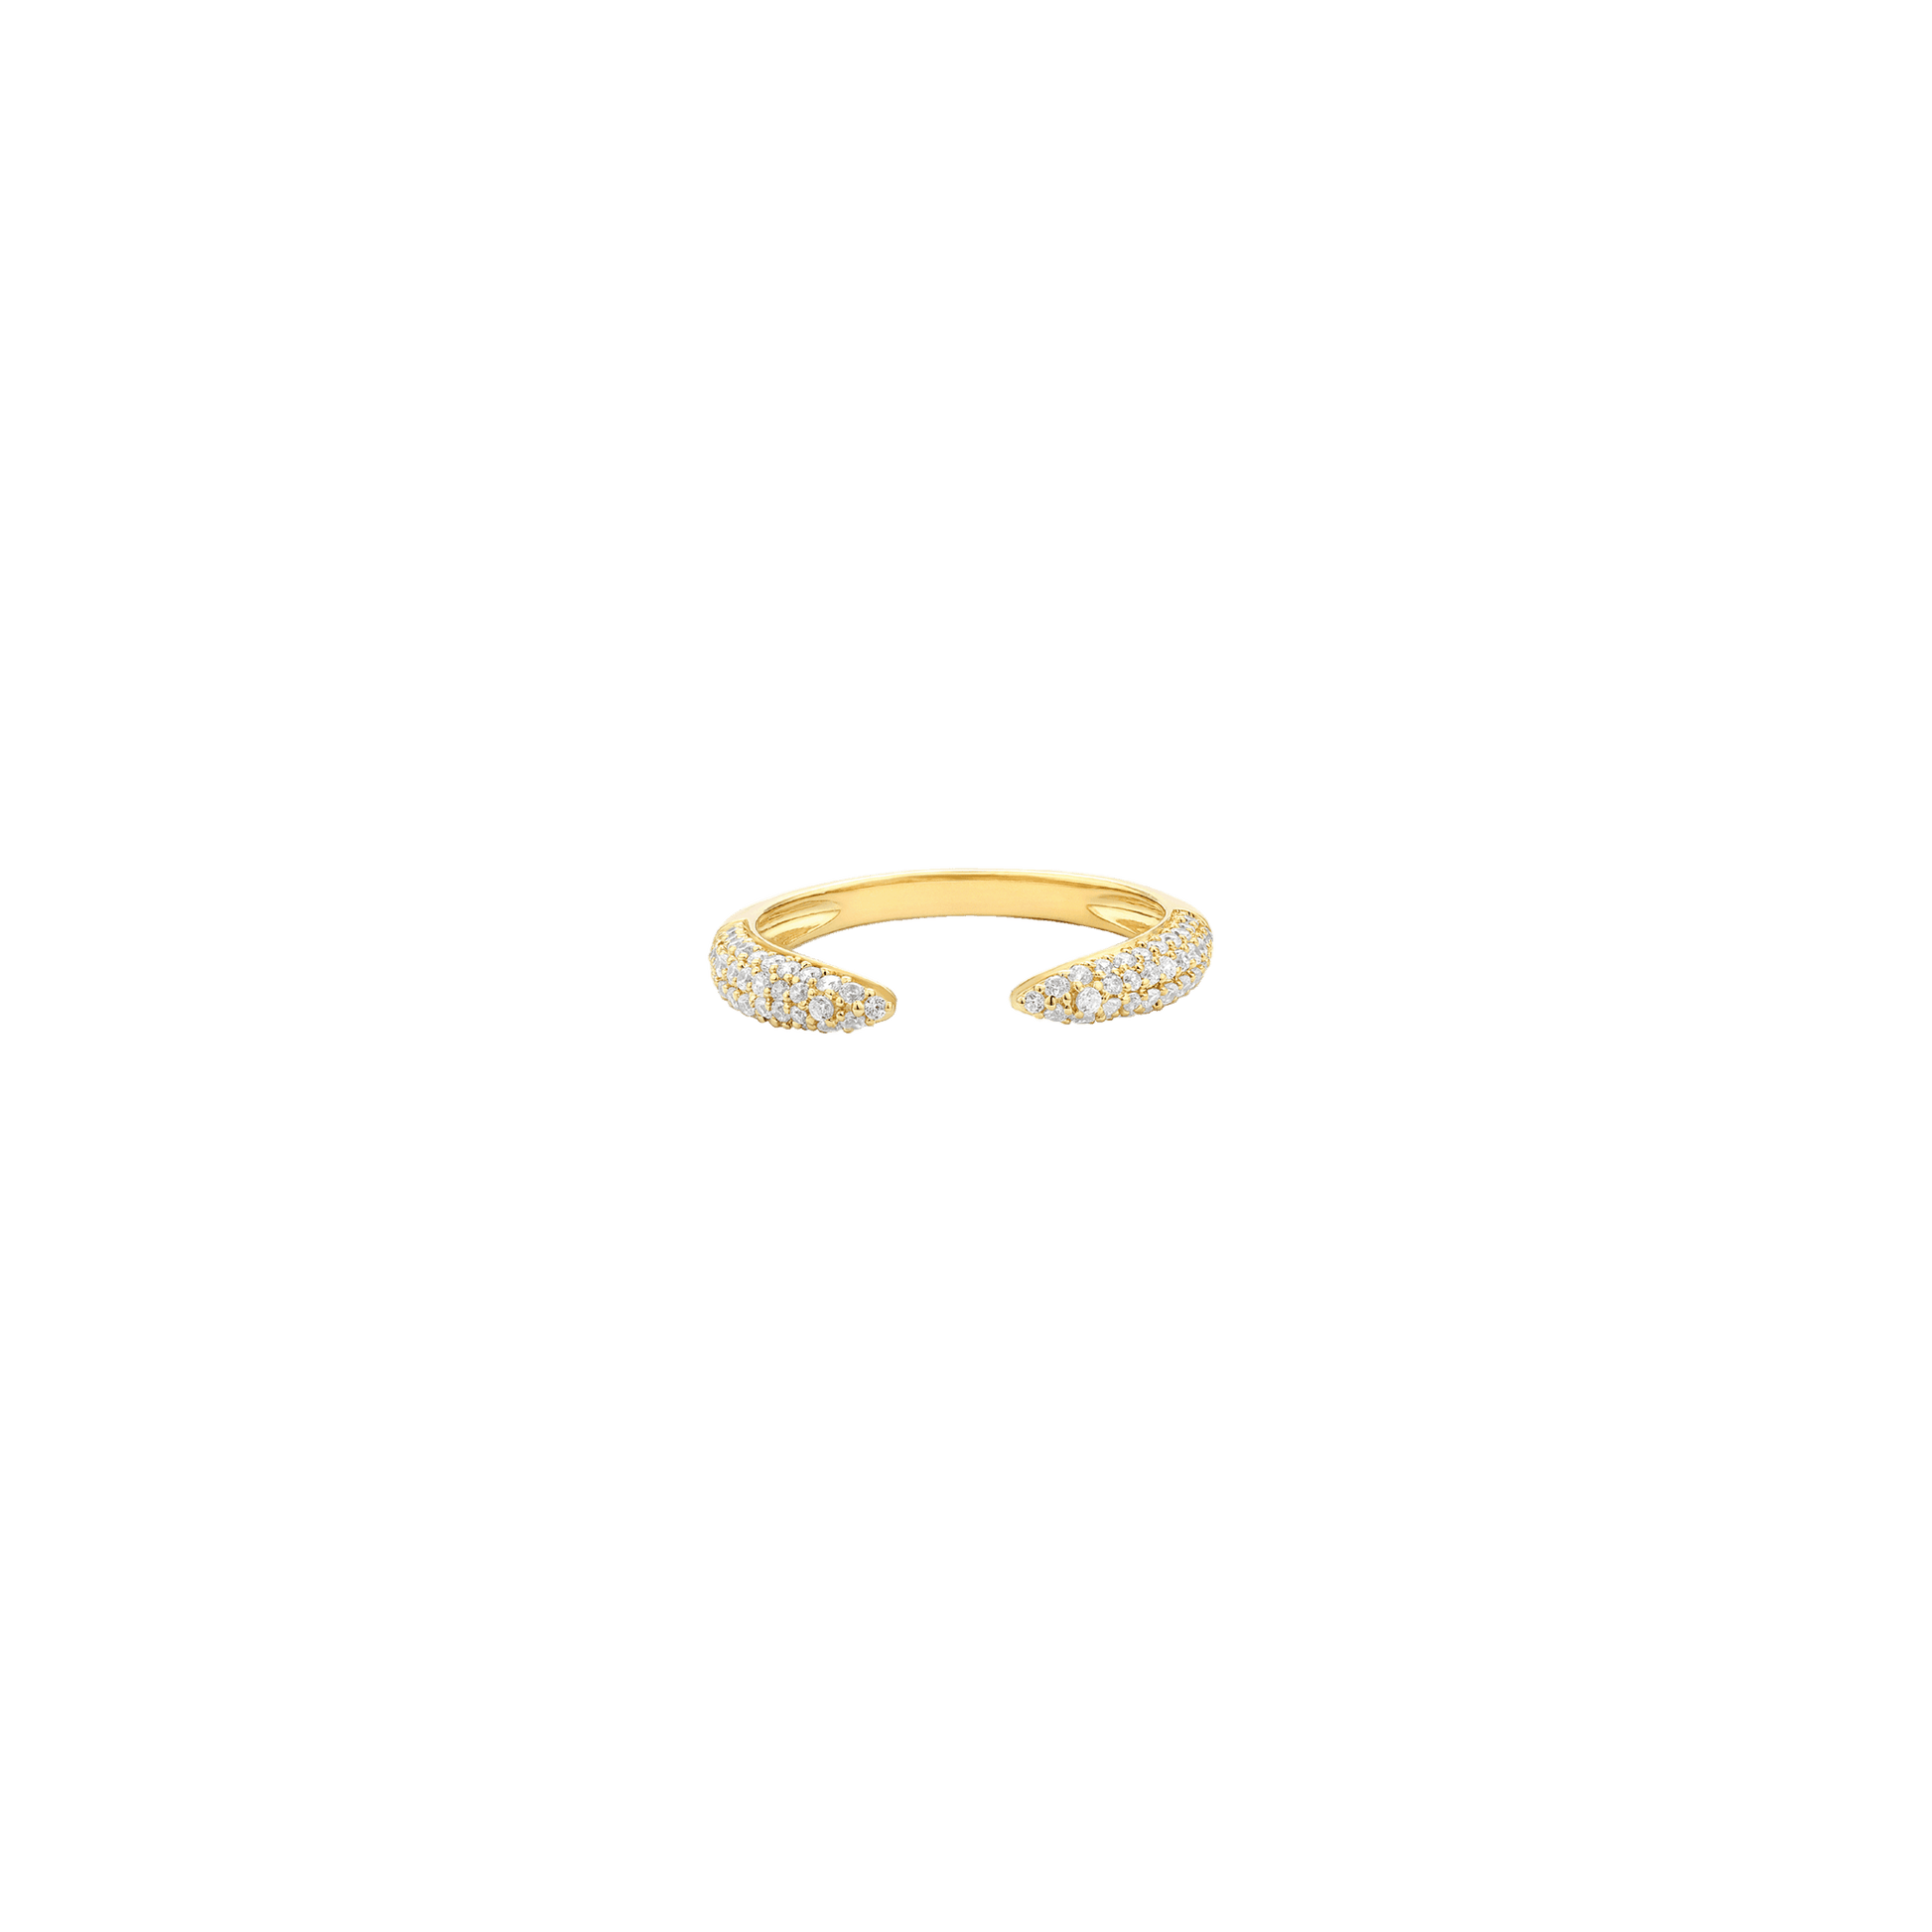 Diamond Claw Ring - 14K Rose Gold Rings 14K Solid Gold 